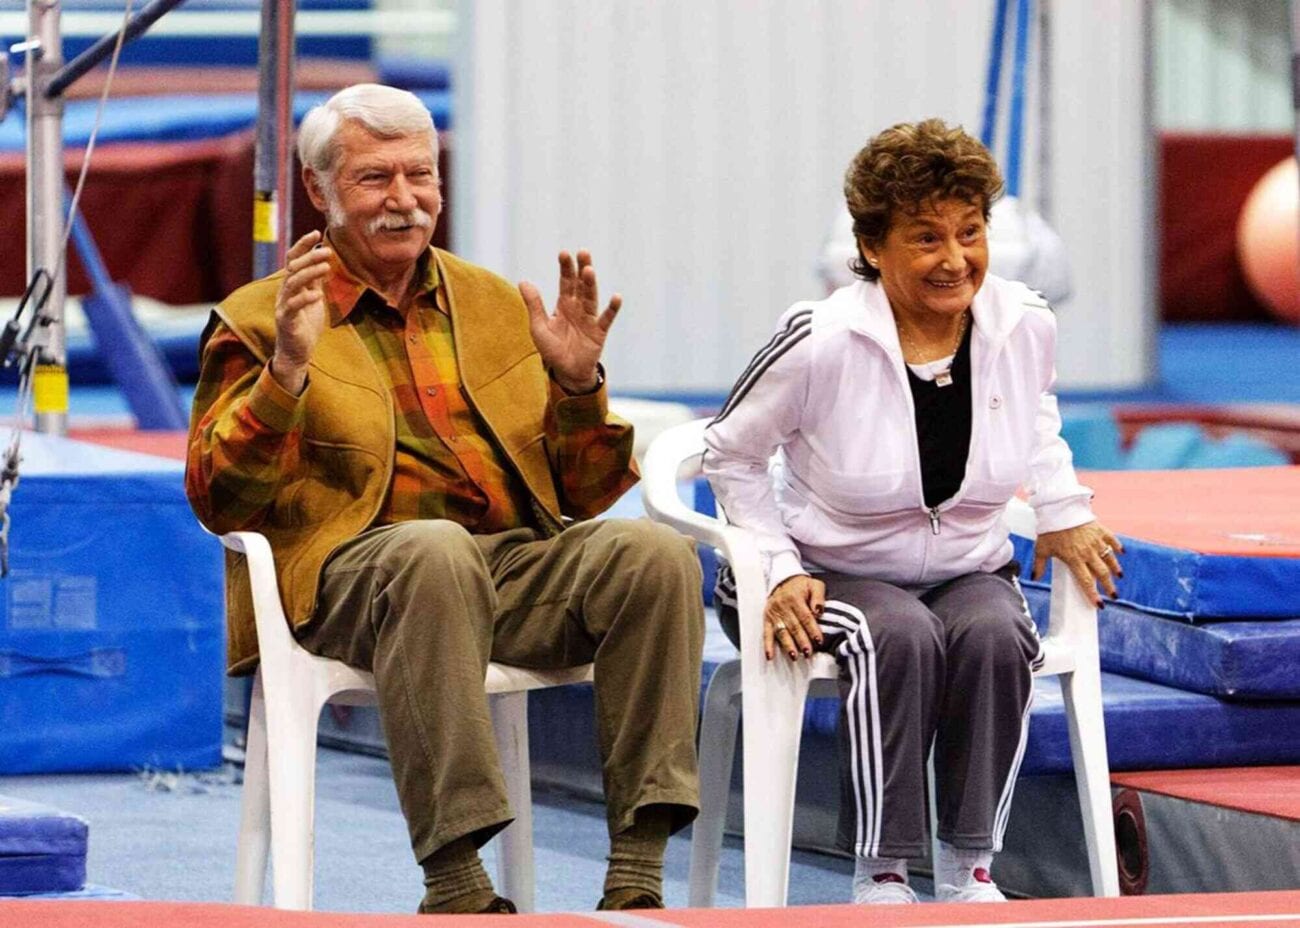 Bela Karolyi is widely renowned in the gymnastics community for his coaching, but the legend is not what he seems to be. Investigate the recent allegations.